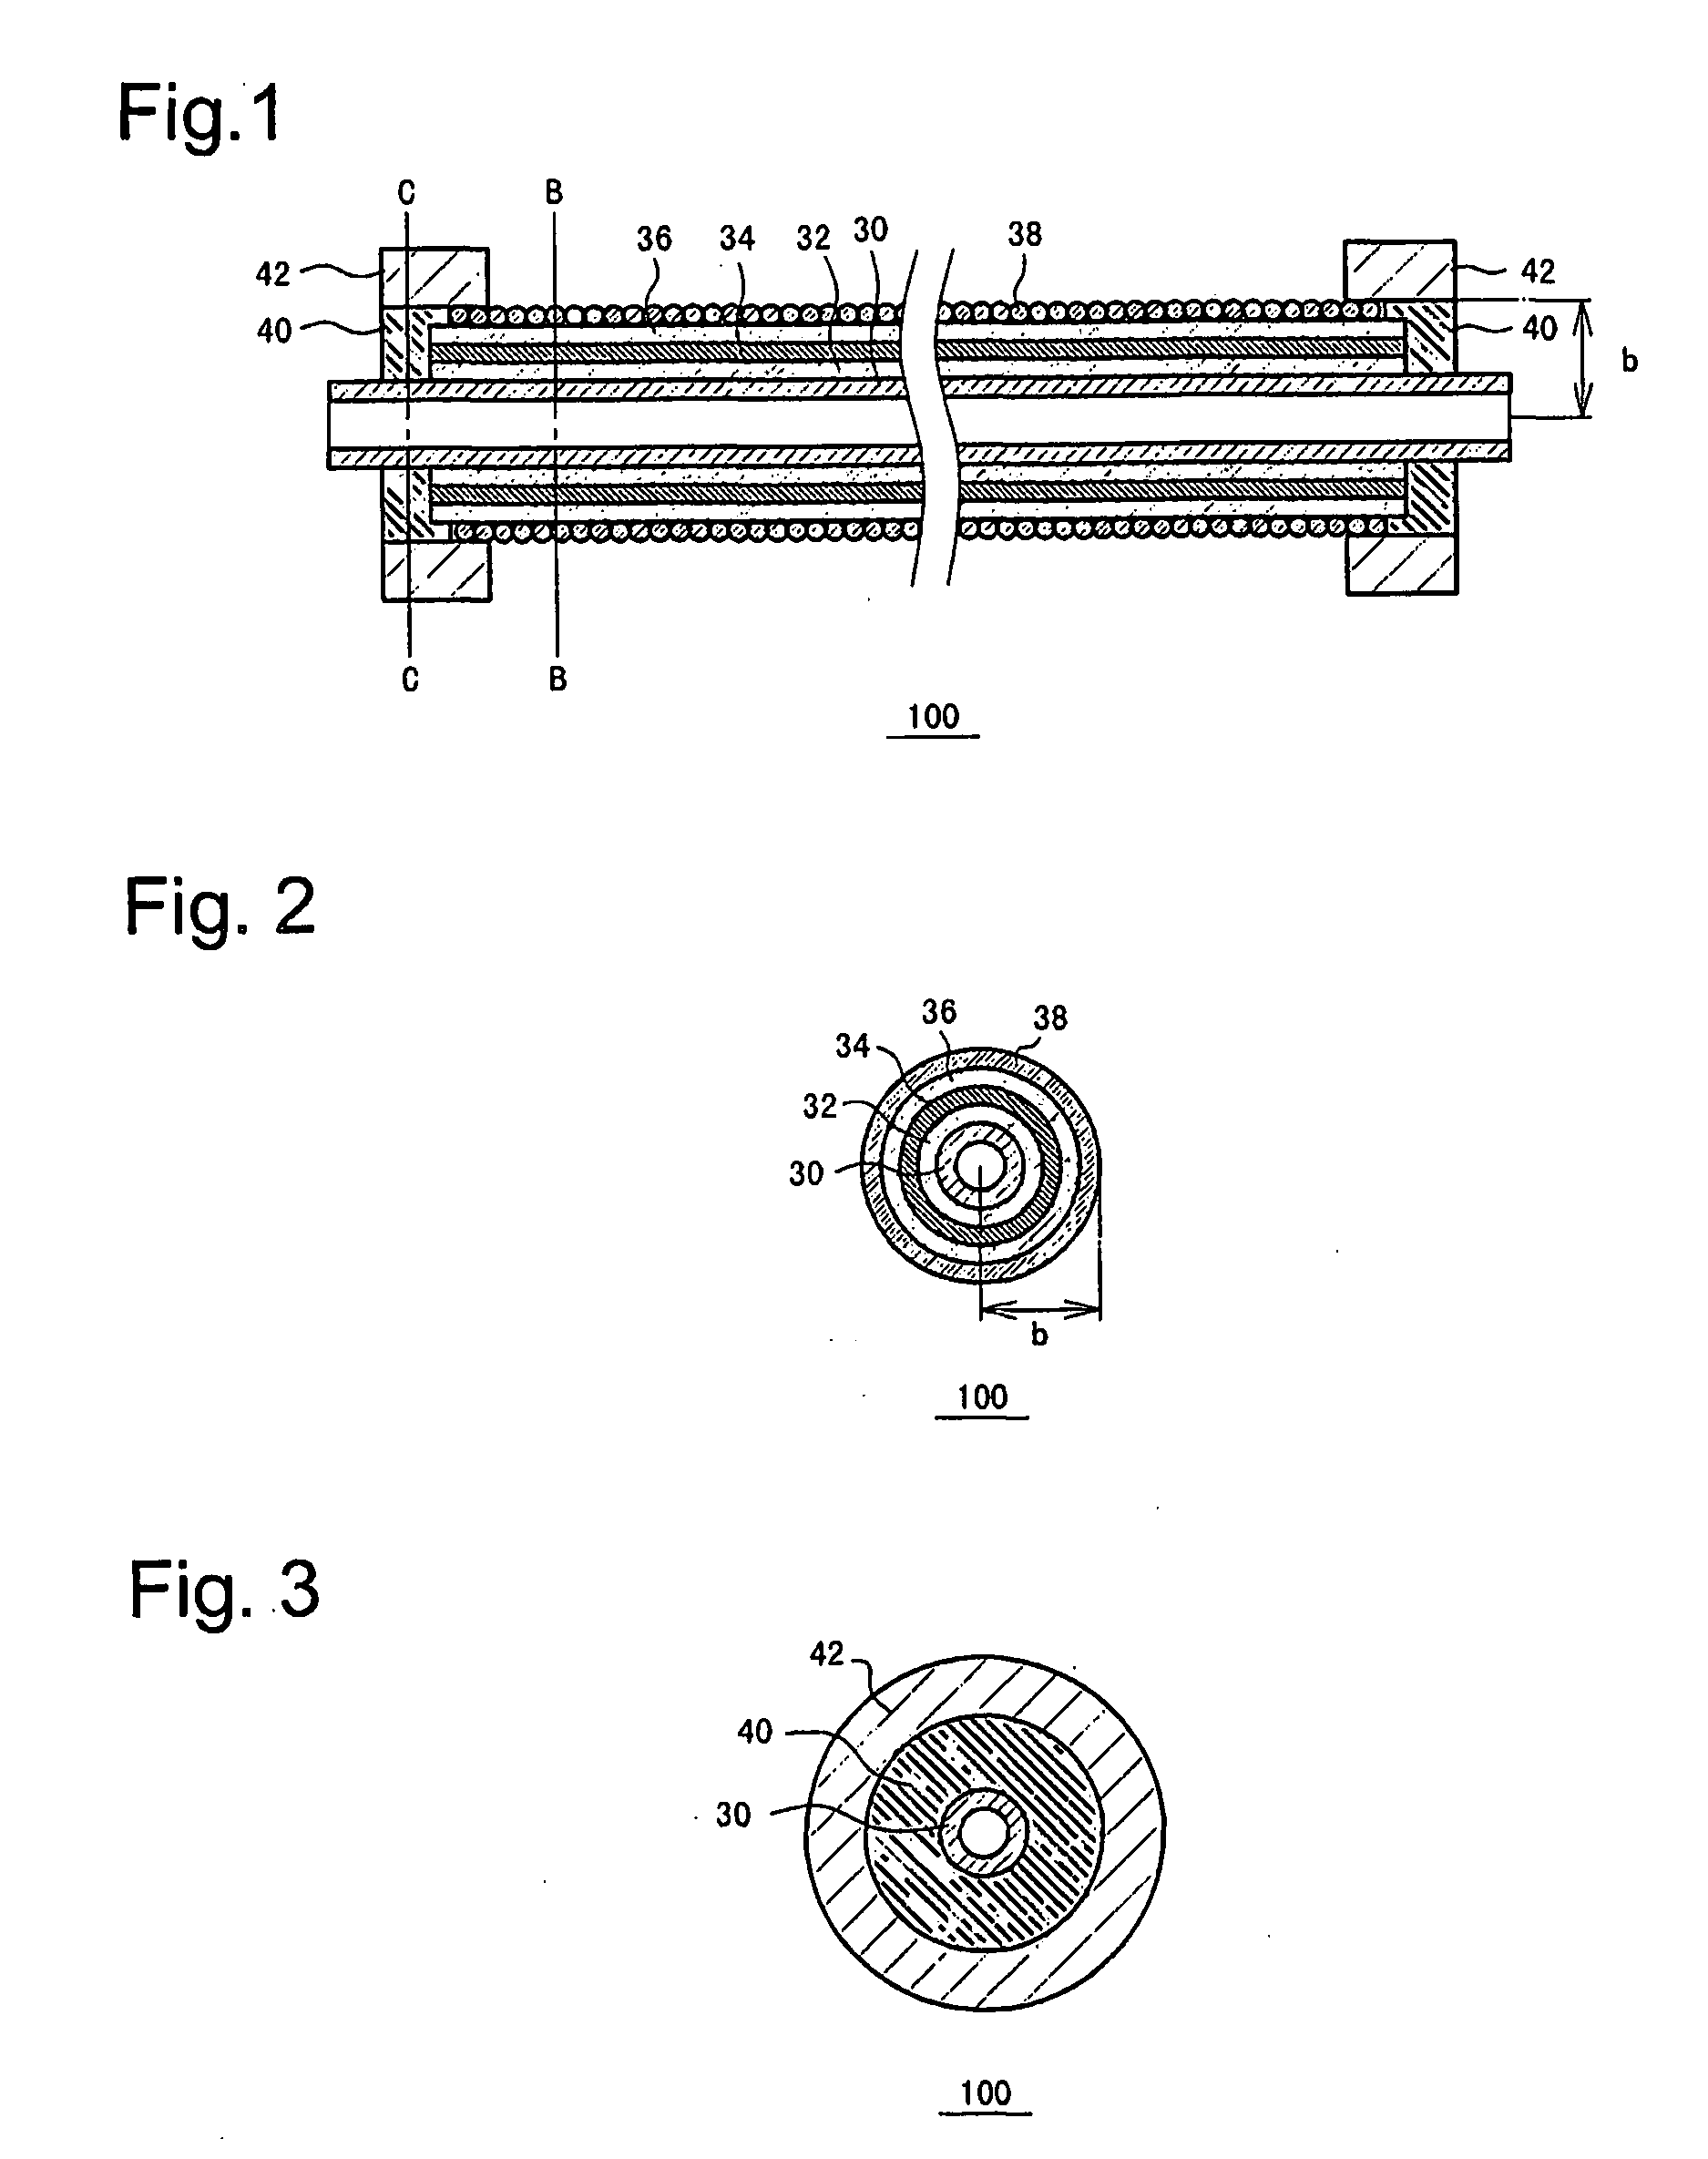 Tubular Fuel Cell and Fuel Cell Module